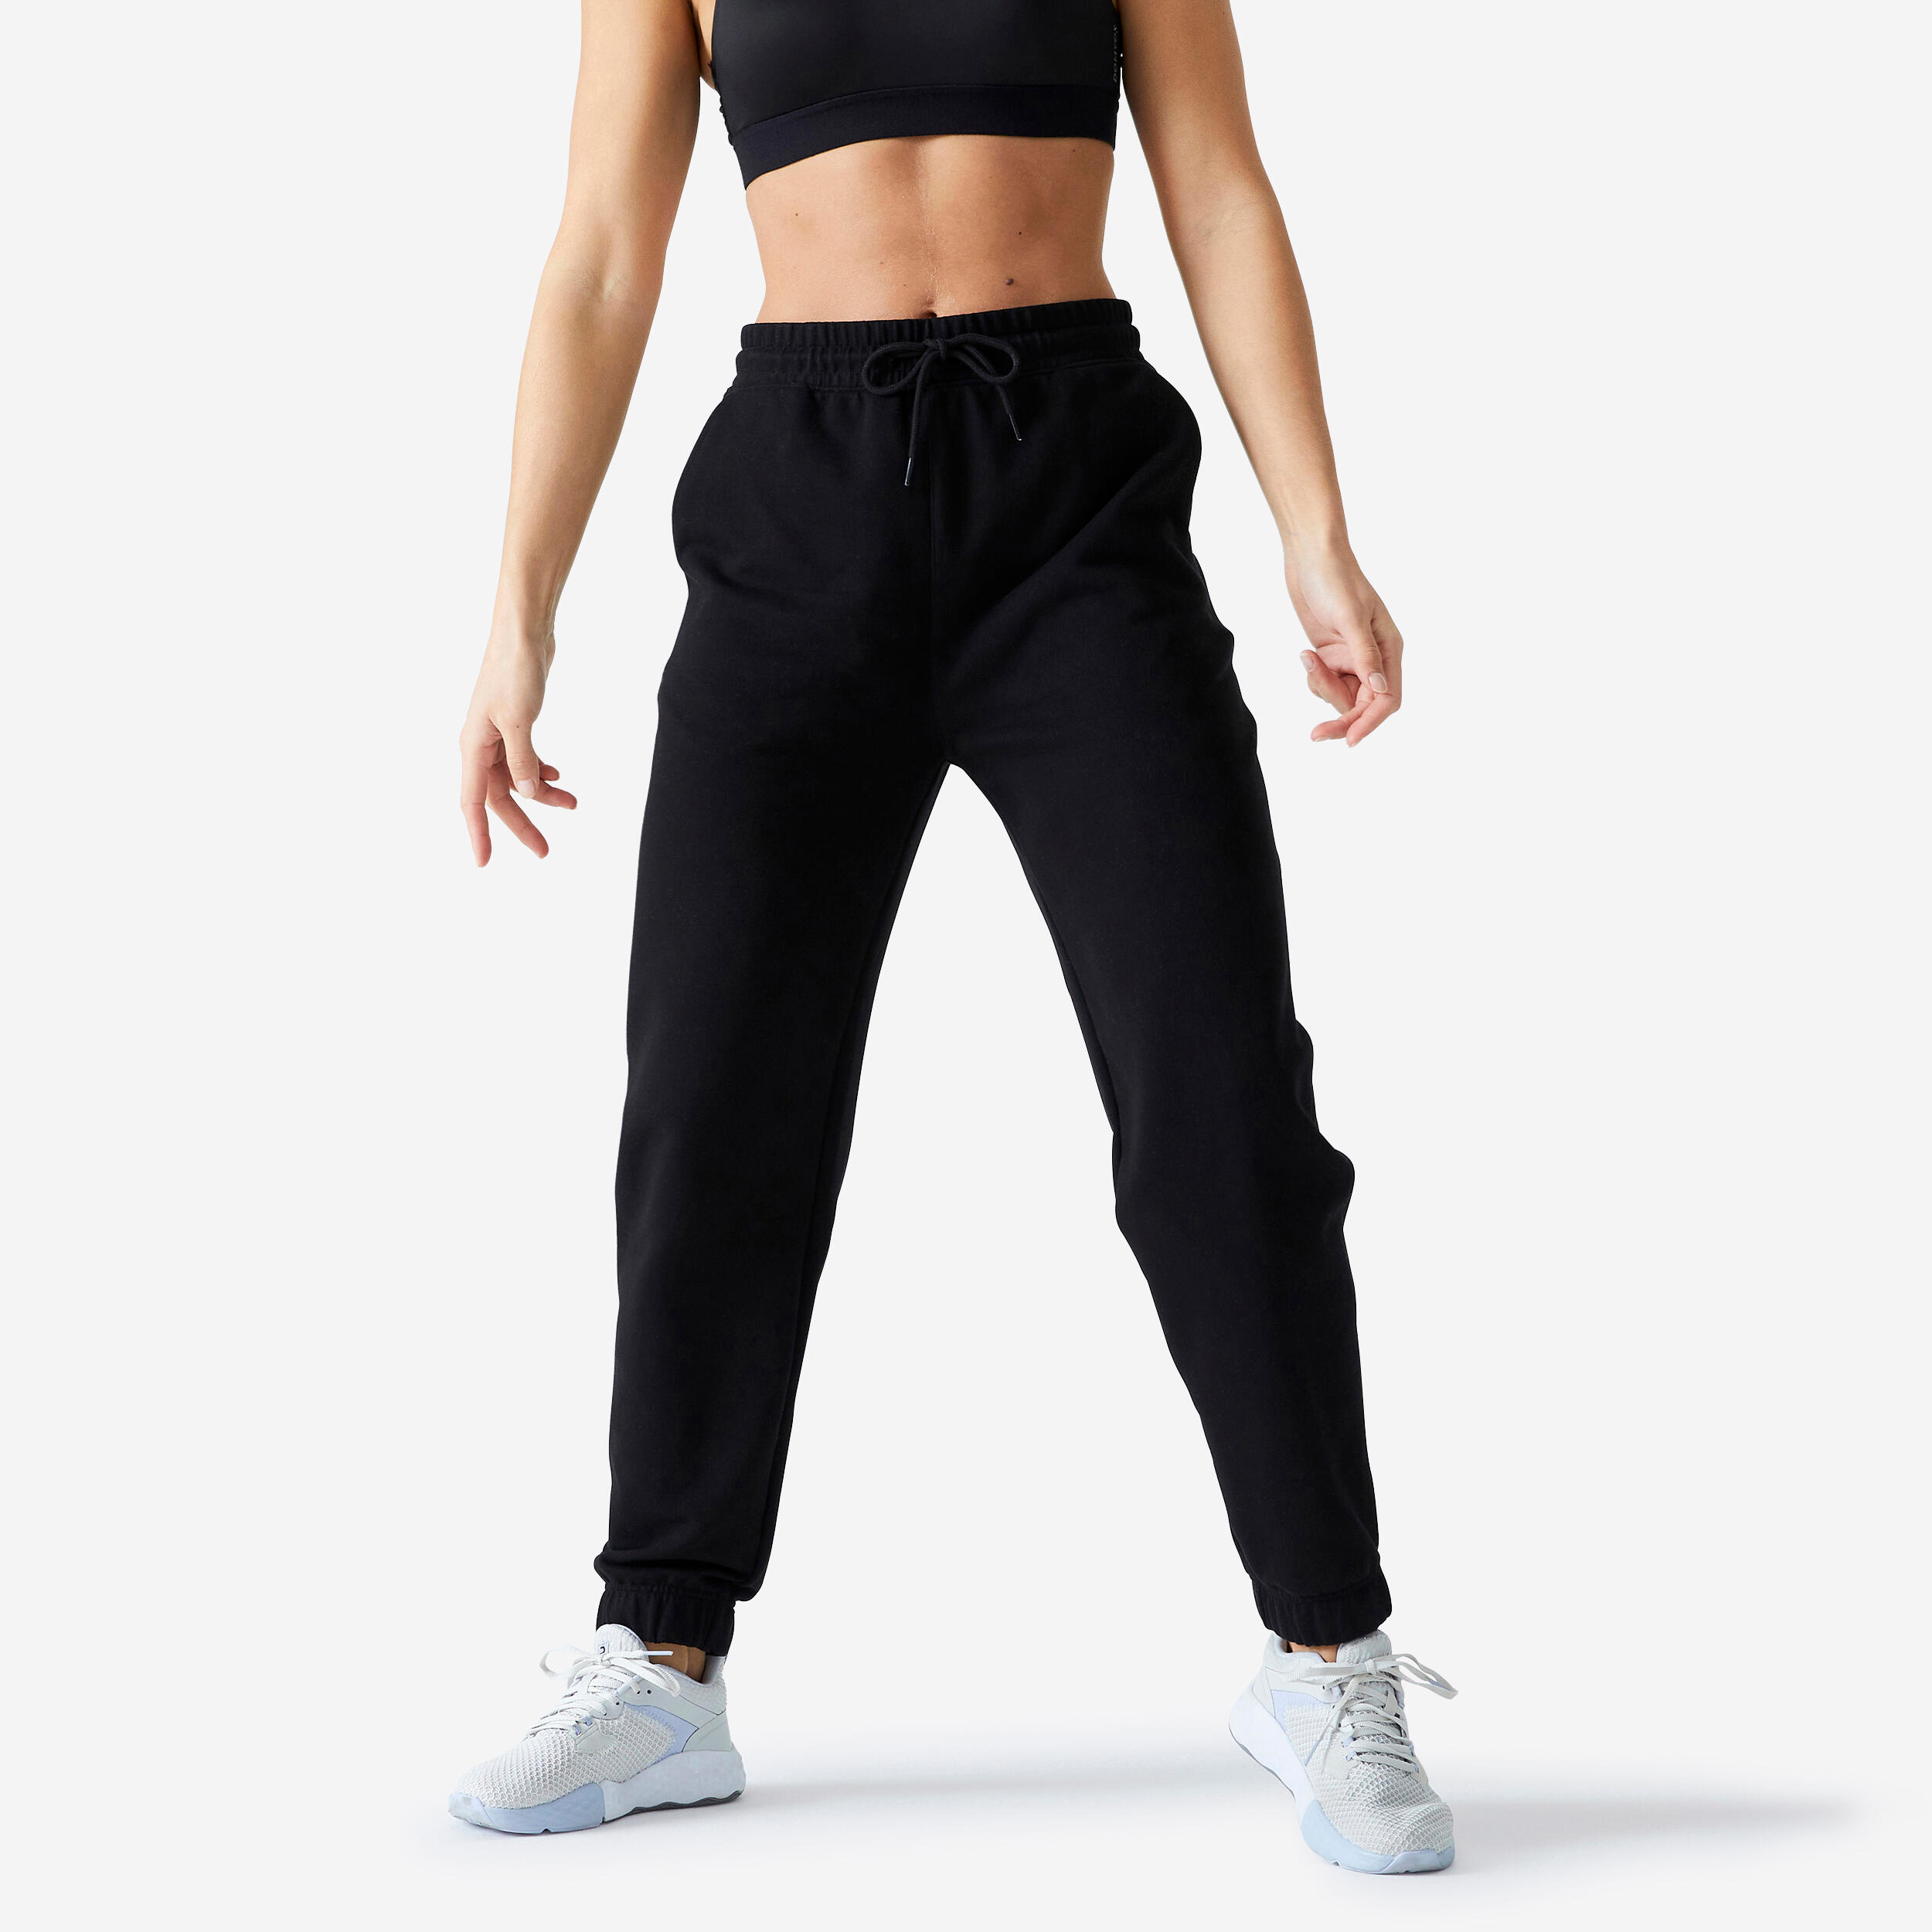 jogger pants for womens Outdoor Zone Black Jogger Pants Men Running  Sweatpants Sports Pants Track Pa | Shopee Philippines